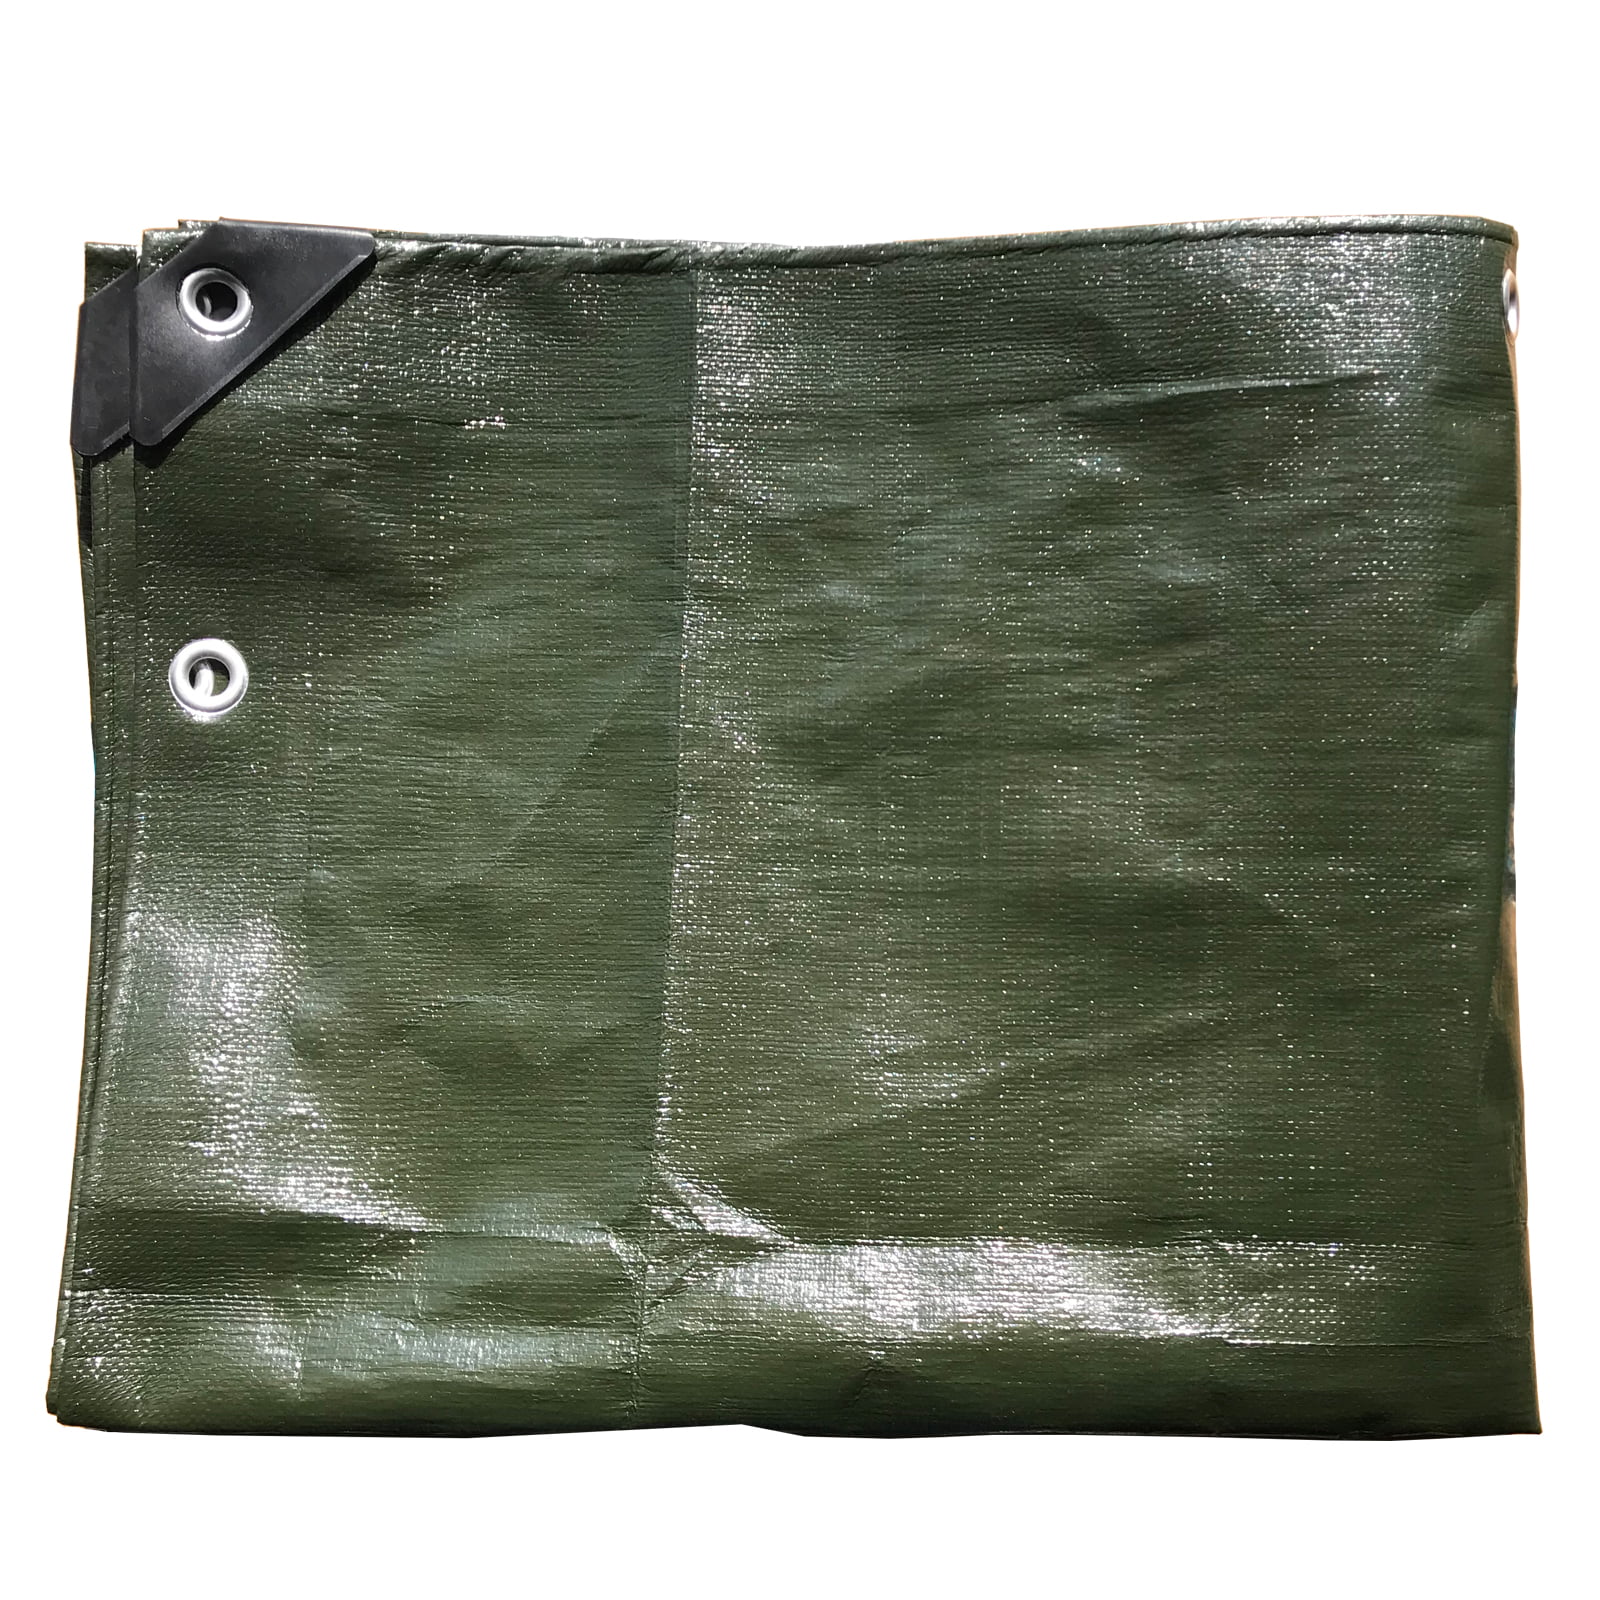 16x20 Heavy Duty Waterproof Tarp 12 Mil Green/Brown All-Weather Canopy Cover 